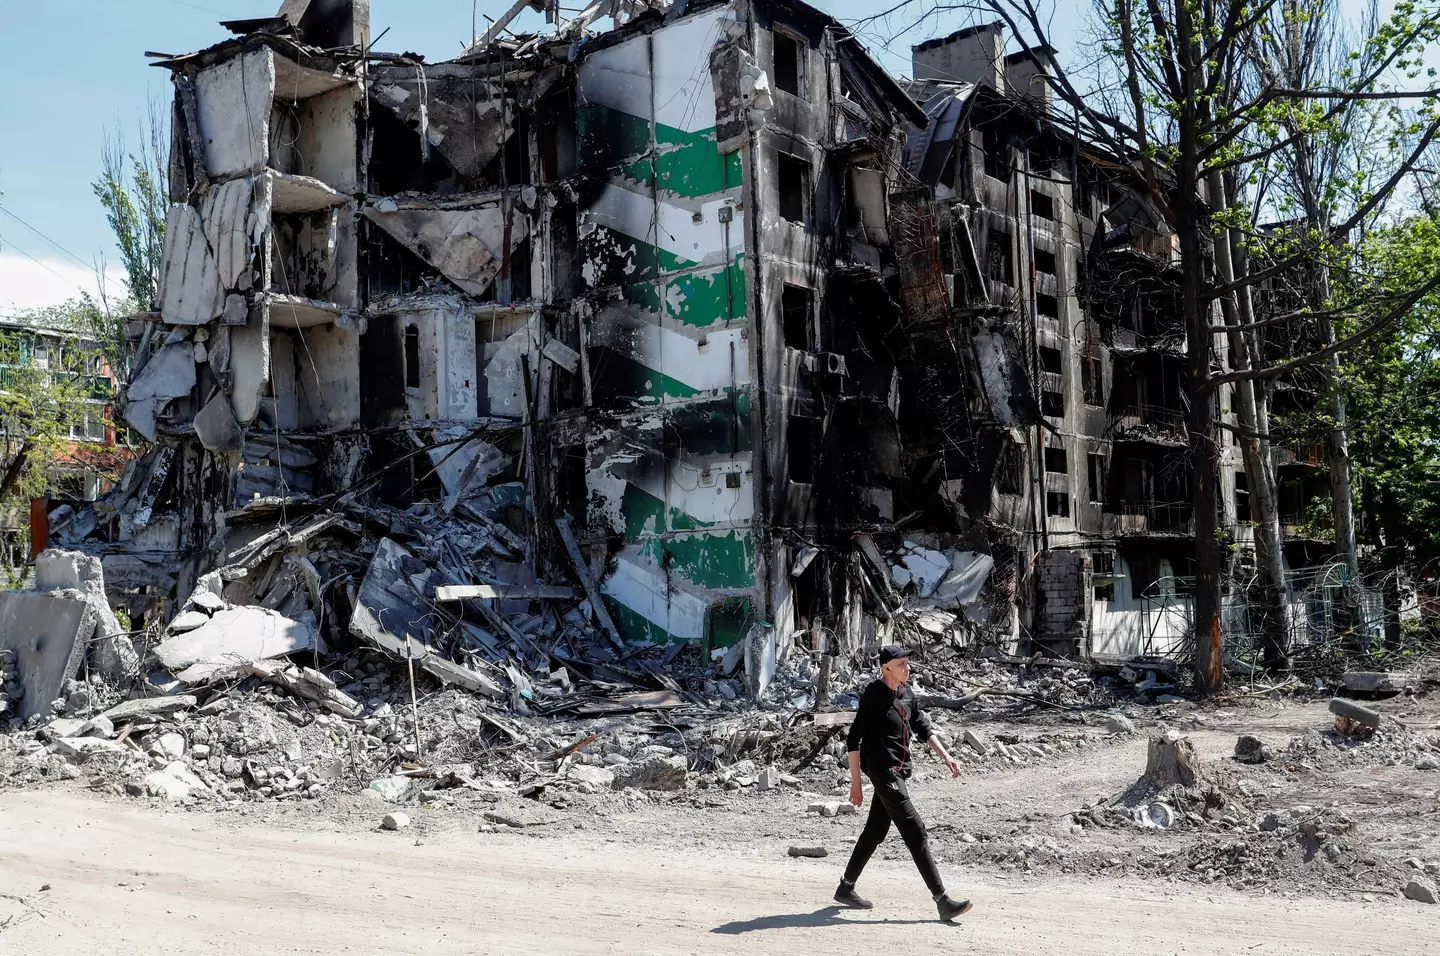 90 percent of Mariupol has been destroyed according to the city's mayor.